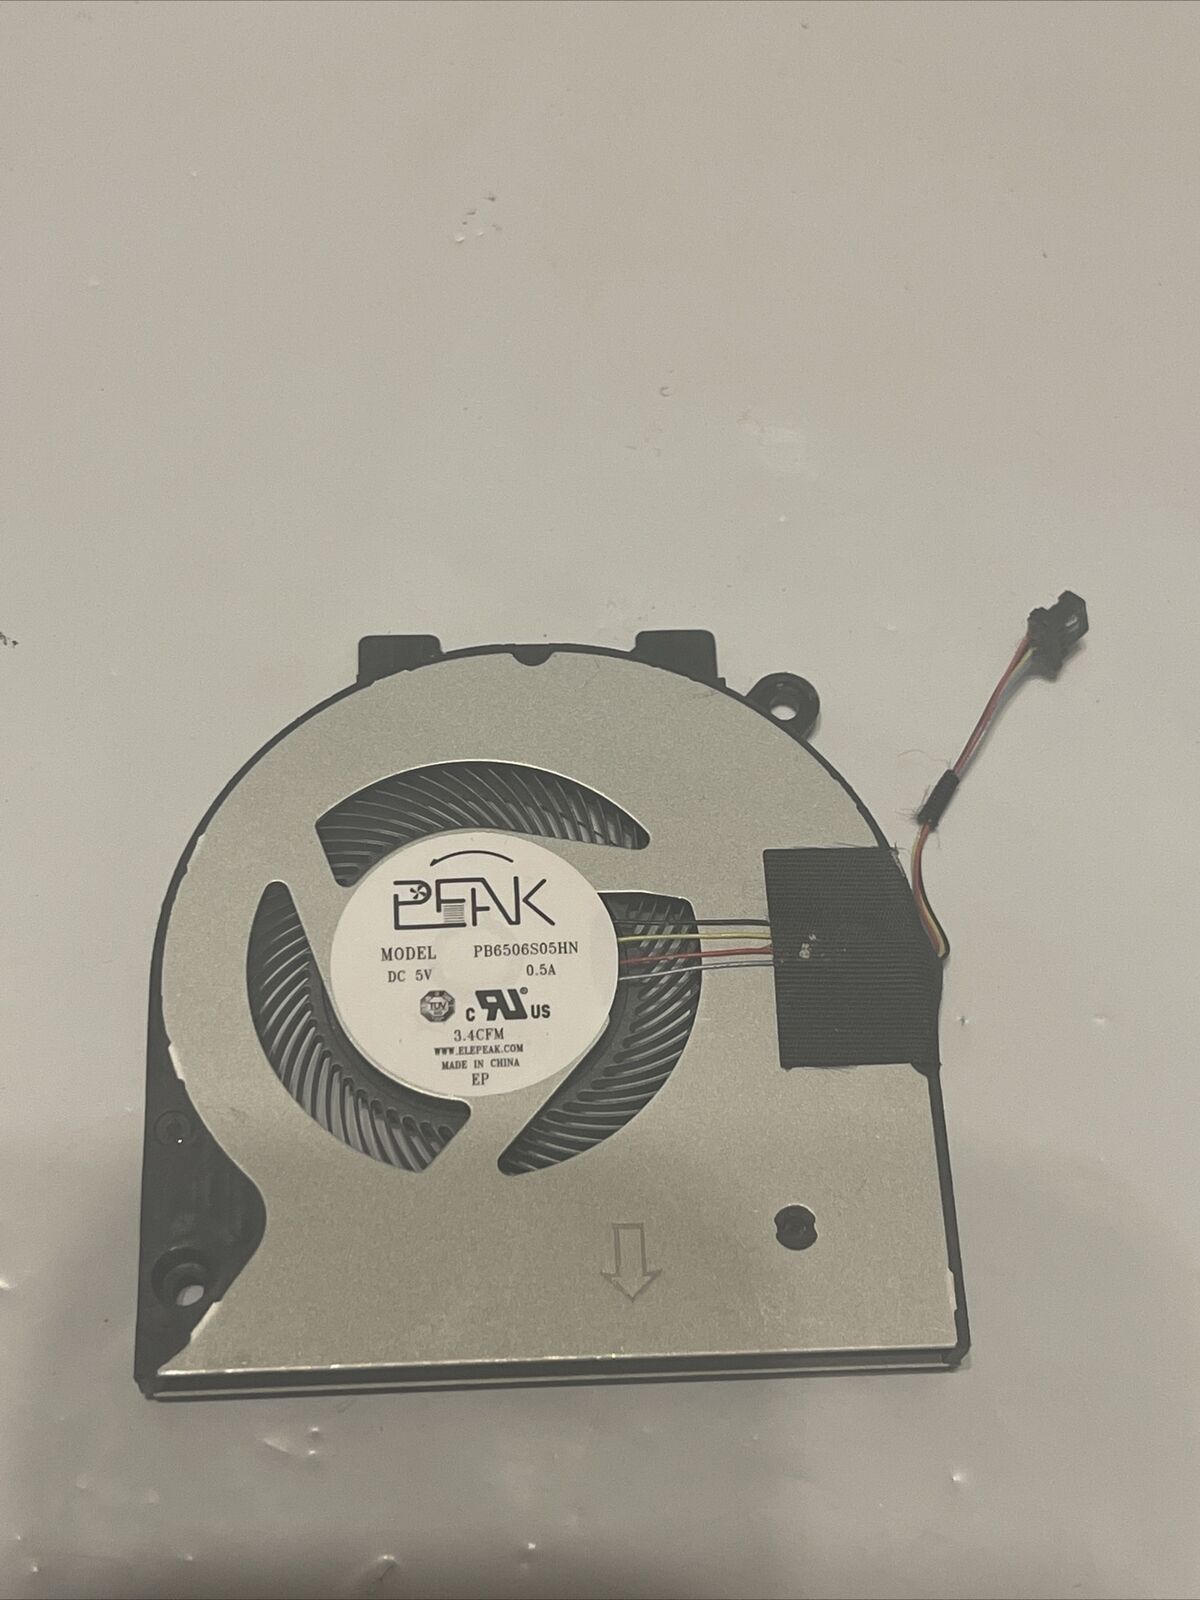 Dell Inspiron 14 5482 14" Genuine Laptop CPU Cooling Fan G0D3G